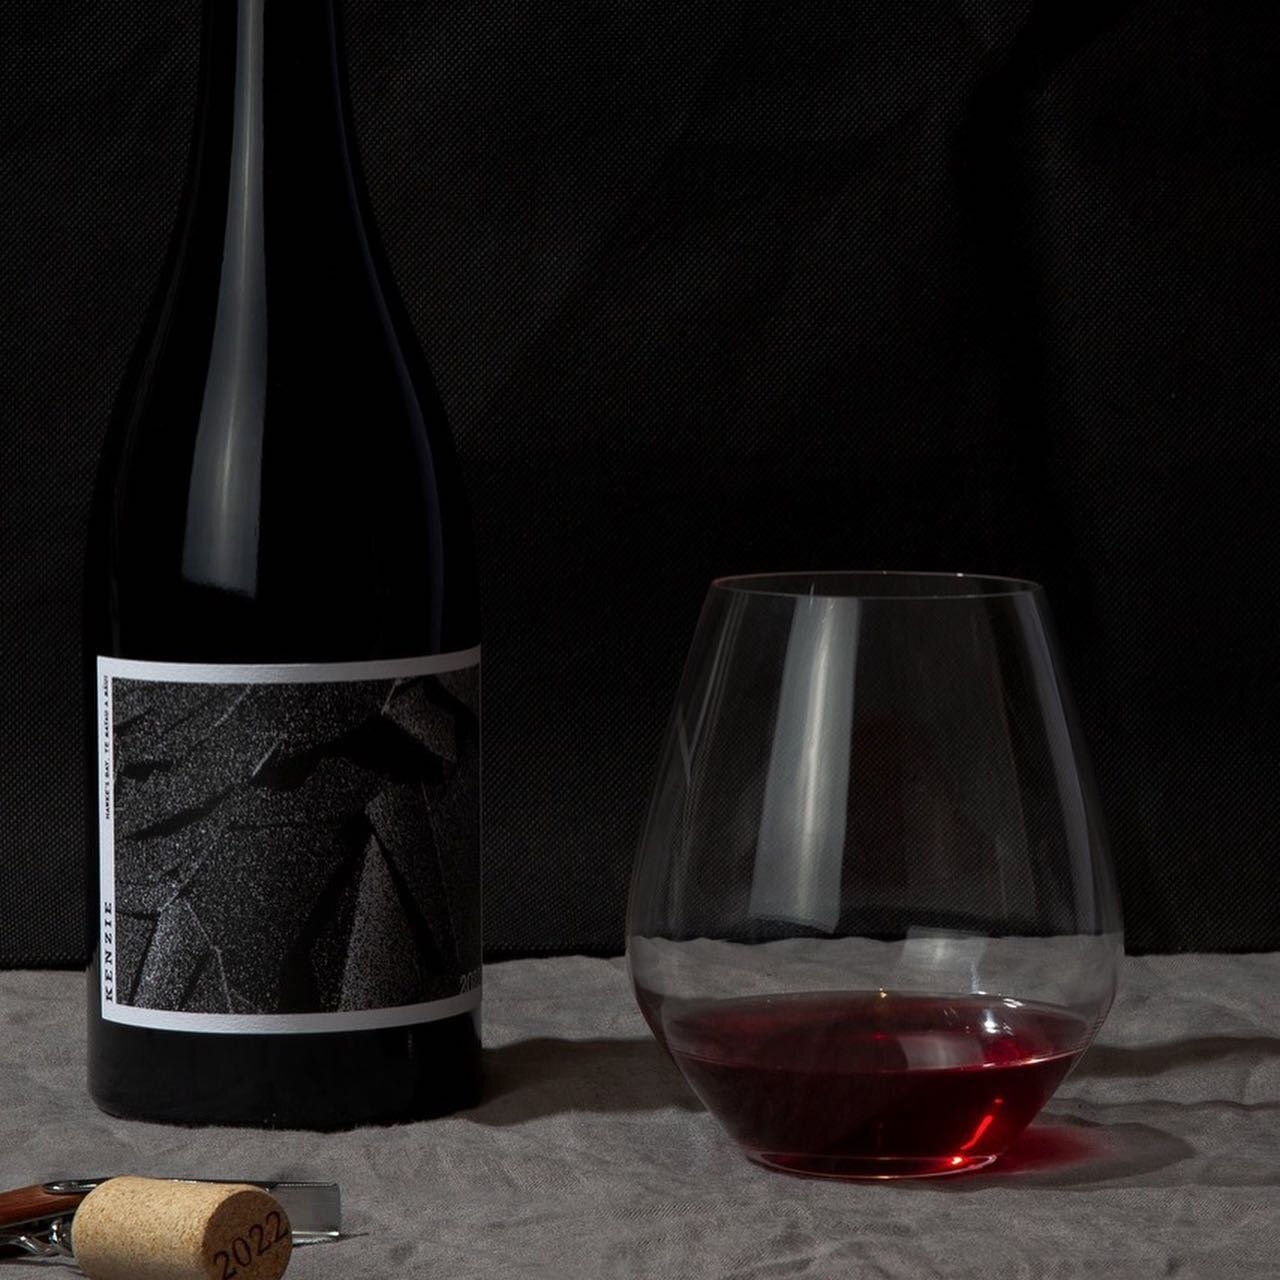 Last but not least for our Spring release. 2022 Duet is a play between light and shade. An organic blend of whole bunch Pinot noir (80%) from Mangatahi provides the beauty and elegance, while Syrah (20%) from Bridge Pā shows spice and depth. Blackber